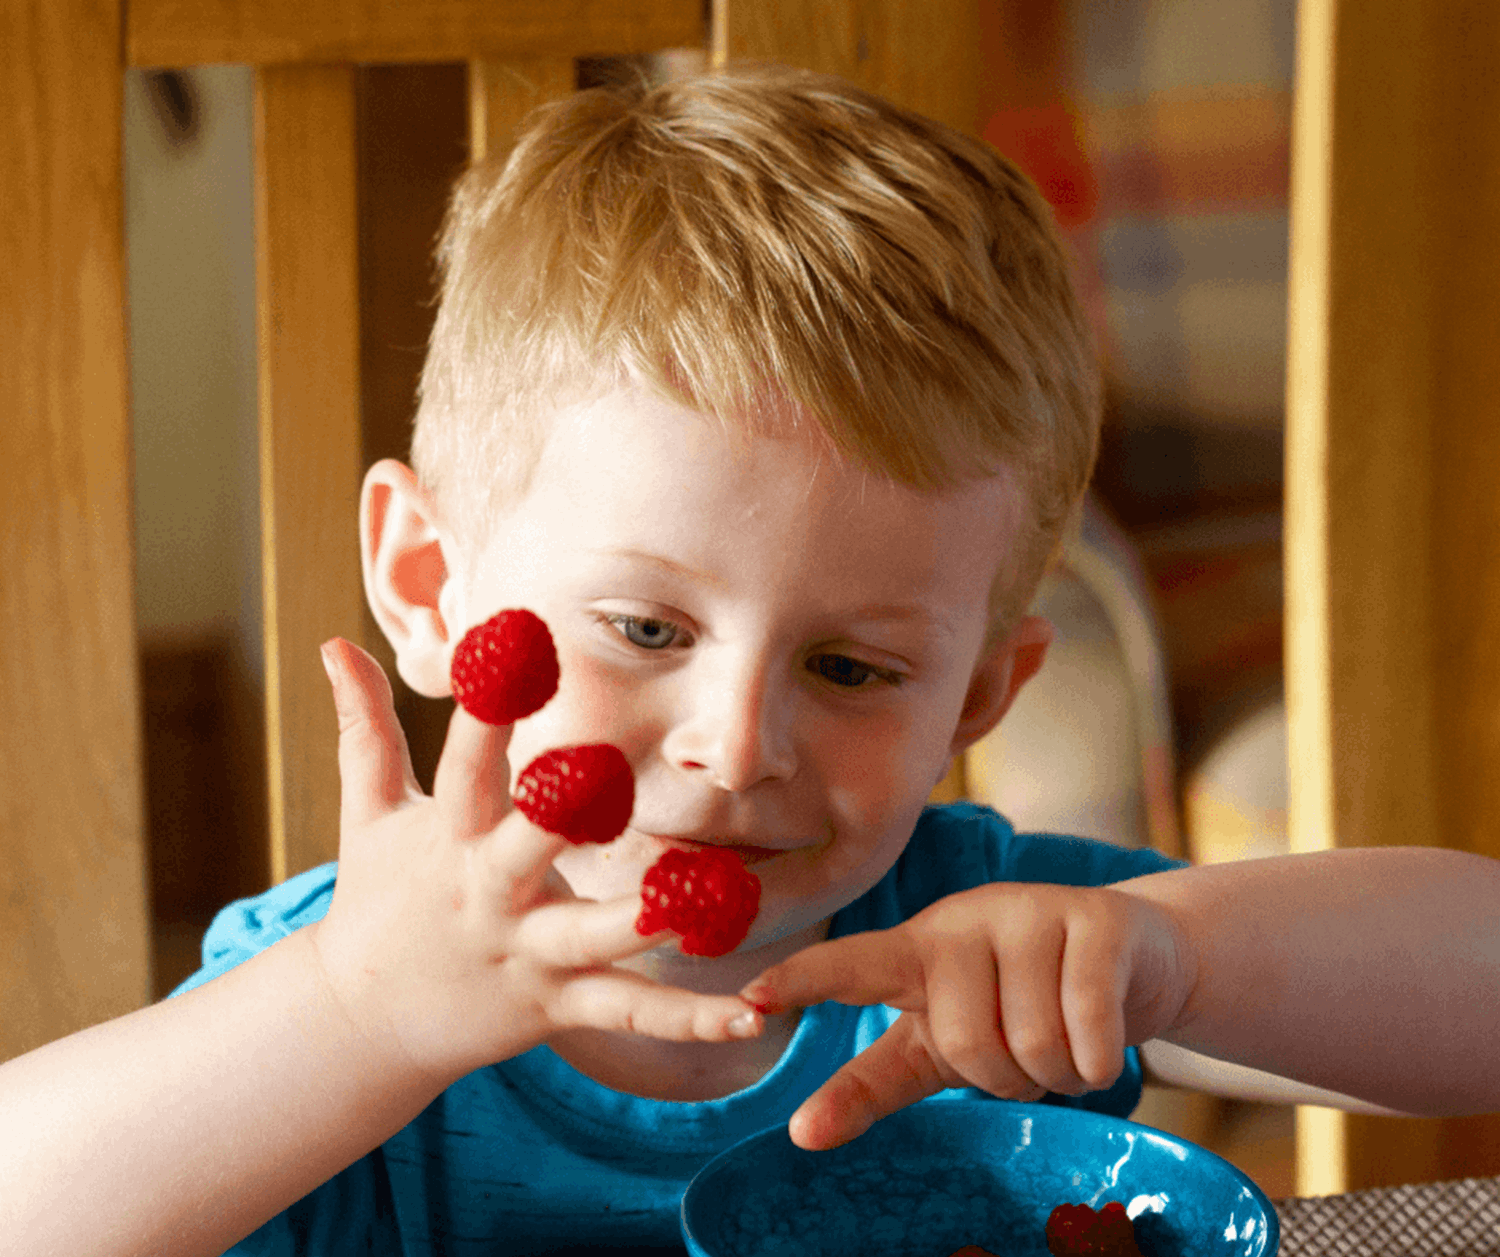 Child counting fingers 